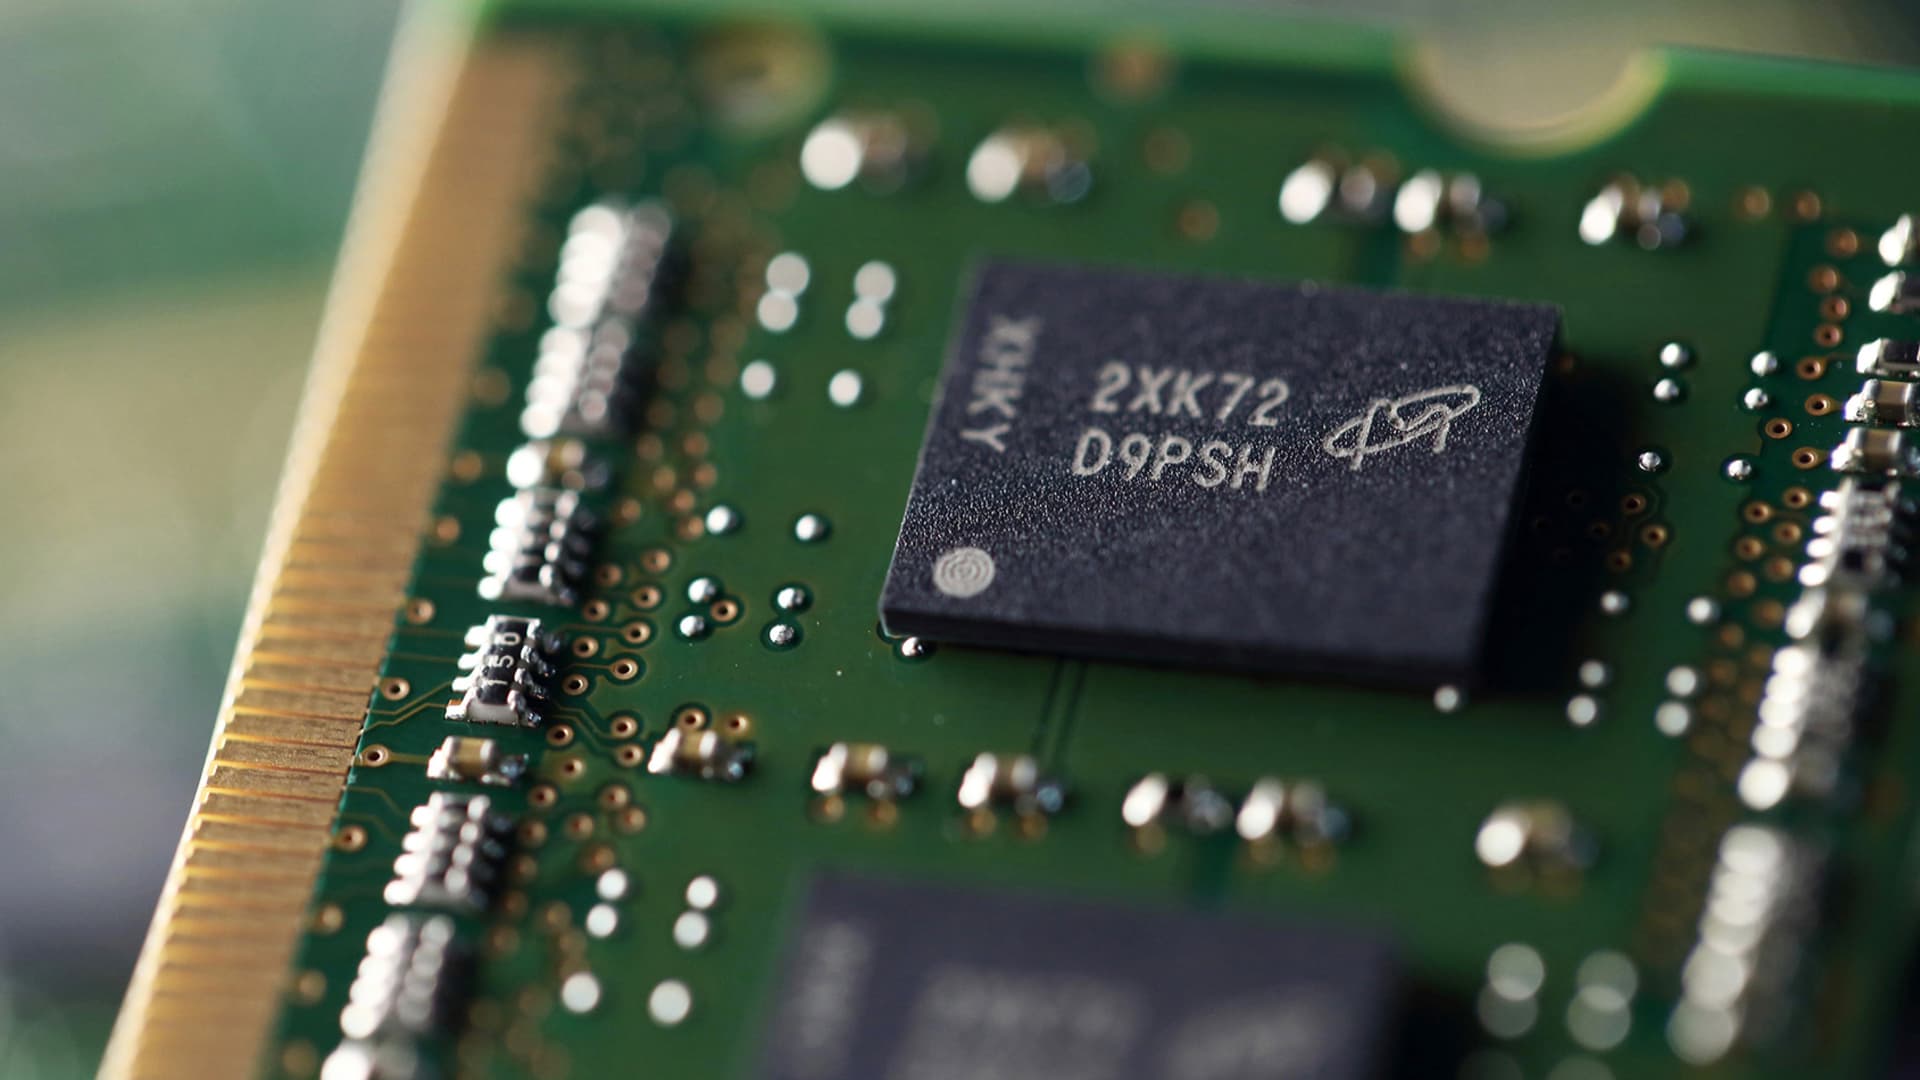 China chip stocks rally after Beijing said U.S. chip giant Micron is 'major security risk'